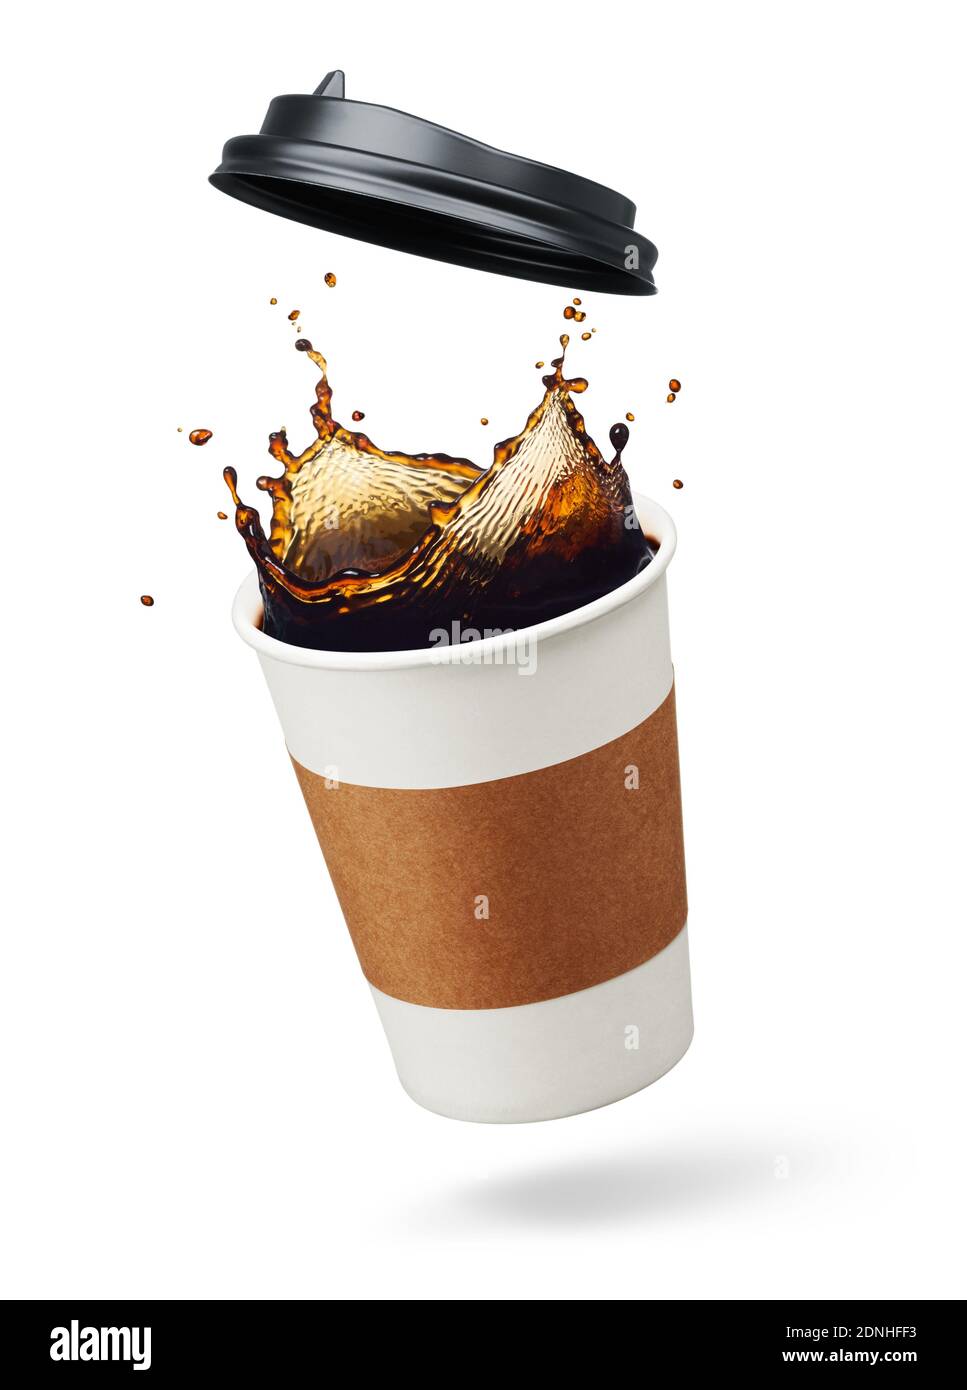 cup of coffee splashing with lid open Stock Photo